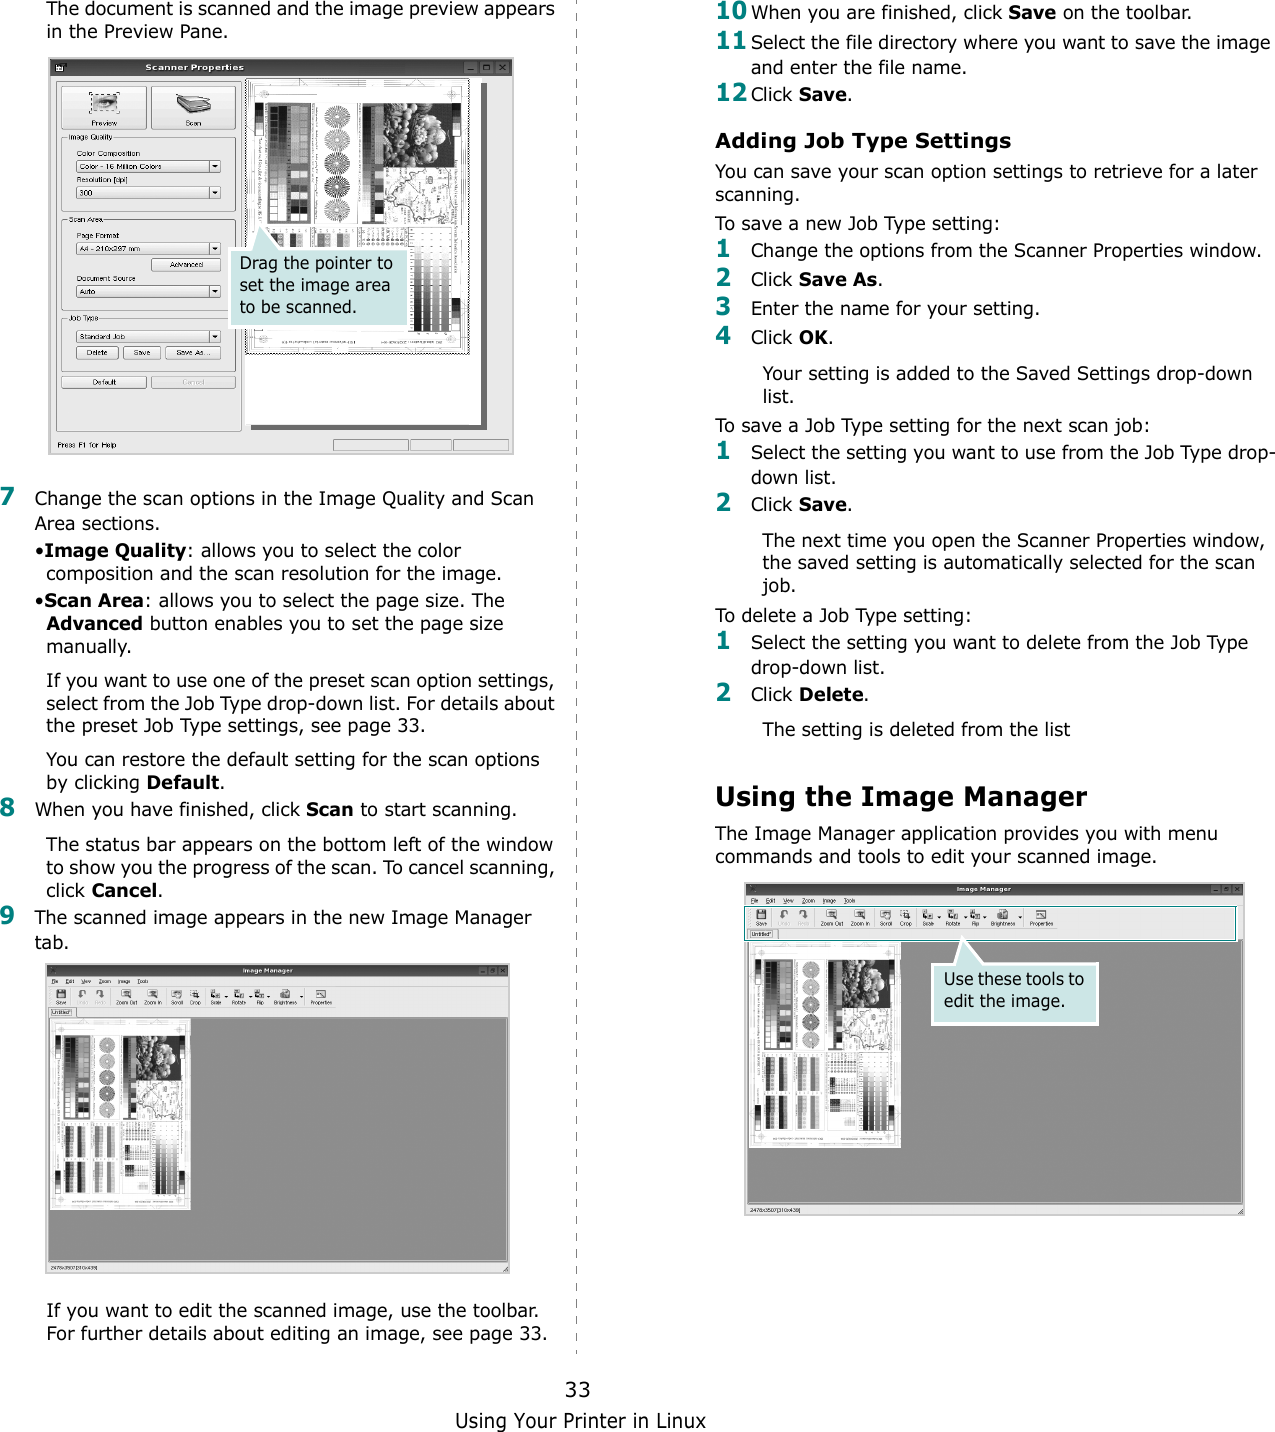 Using Your Printer in Linux33The document is scanned and the image preview appears in the Preview Pane.7Change the scan options in the Image Quality and Scan Area sections.•Image Quality: allows you to select the color composition and the scan resolution for the image.•Scan Area: allows you to select the page size. The Advanced button enables you to set the page size manually.If you want to use one of the preset scan option settings, select from the Job Type drop-down list. For details about the preset Job Type settings, see page 33.You can restore the default setting for the scan options by clicking Default.8When you have finished, click Scan to start scanning.The status bar appears on the bottom left of the window to show you the progress of the scan. To cancel scanning, click Cancel.9The scanned image appears in the new Image Manager tab.If you want to edit the scanned image, use the toolbar. For further details about editing an image, see page 33.Drag the pointer to set the image area to be scanned.10When you are finished, click Save on the toolbar.11Select the file directory where you want to save the image and enter the file name. 12Click Save.Adding Job Type SettingsYou can save your scan option settings to retrieve for a later scanning.To save a new Job Type setting:1Change the options from the Scanner Properties window.2Click Save As.3Enter the name for your setting.4Click OK. Your setting is added to the Saved Settings drop-down list.To save a Job Type setting for the next scan job:1Select the setting you want to use from the Job Type drop-down list.2Click Save.The next time you open the Scanner Properties window, the saved setting is automatically selected for the scan job.To delete a Job Type setting:1Select the setting you want to delete from the Job Type drop-down list.2Click Delete.The setting is deleted from the listUsing the Image ManagerThe Image Manager application provides you with menu commands and tools to edit your scanned image.Use these tools to edit the image.